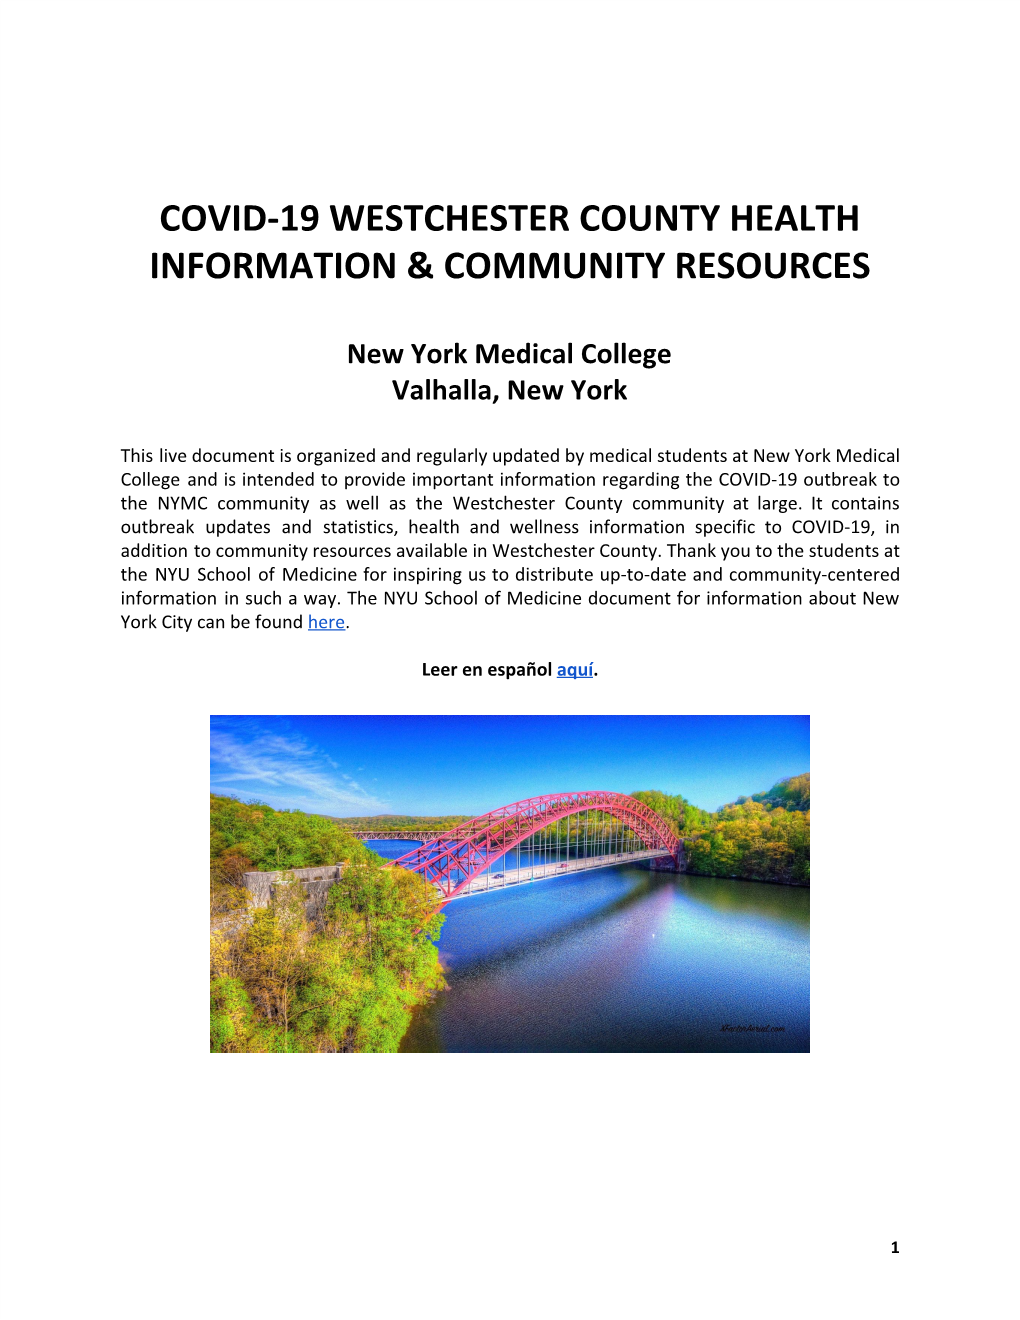 Covid-19 Westchester County Health Information & Community Resources